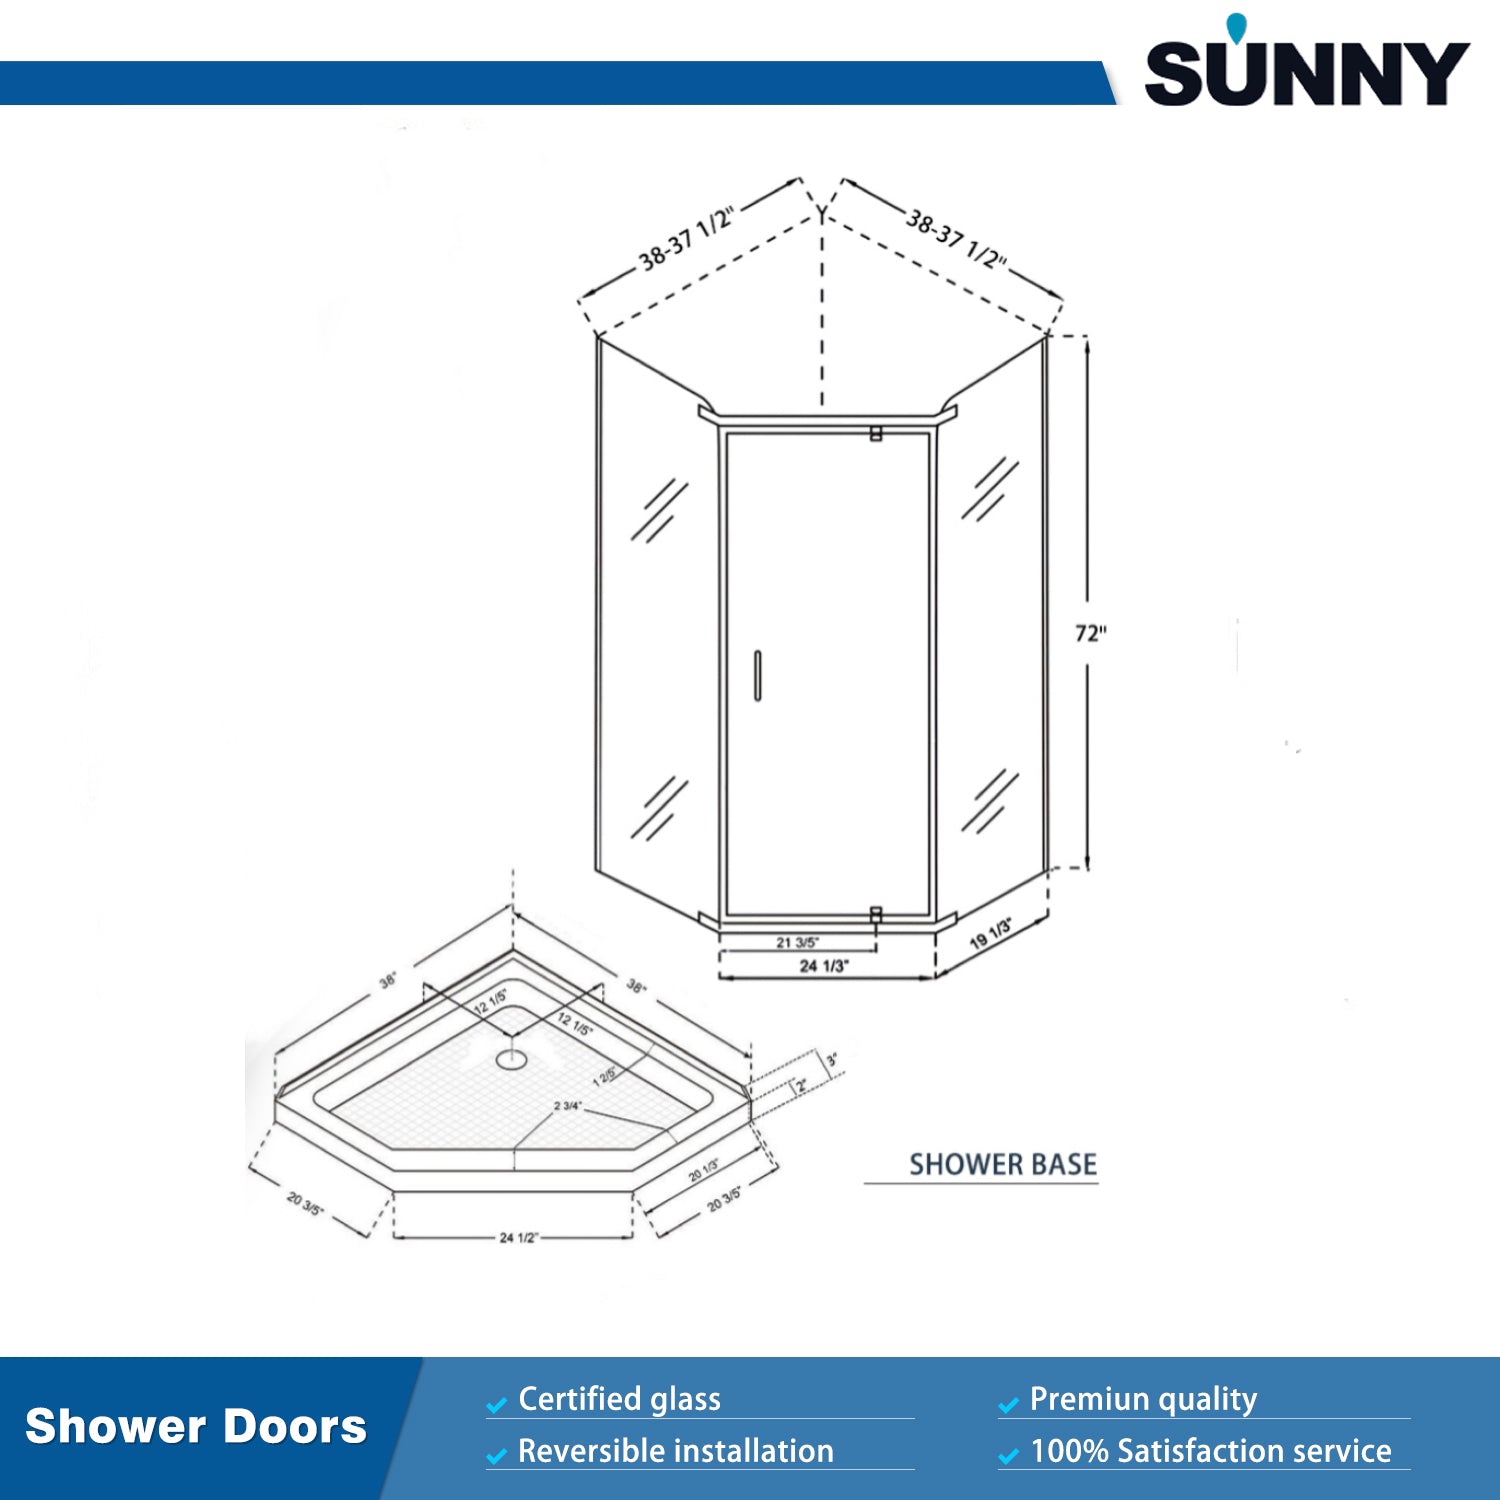 SUNNY SHOWER 36.7 in. W x 36.7 in. D x 71.8 in. H Chrome Finish Pivot Enclosures With Pivot Door And White Diamond Bases Size Dscription